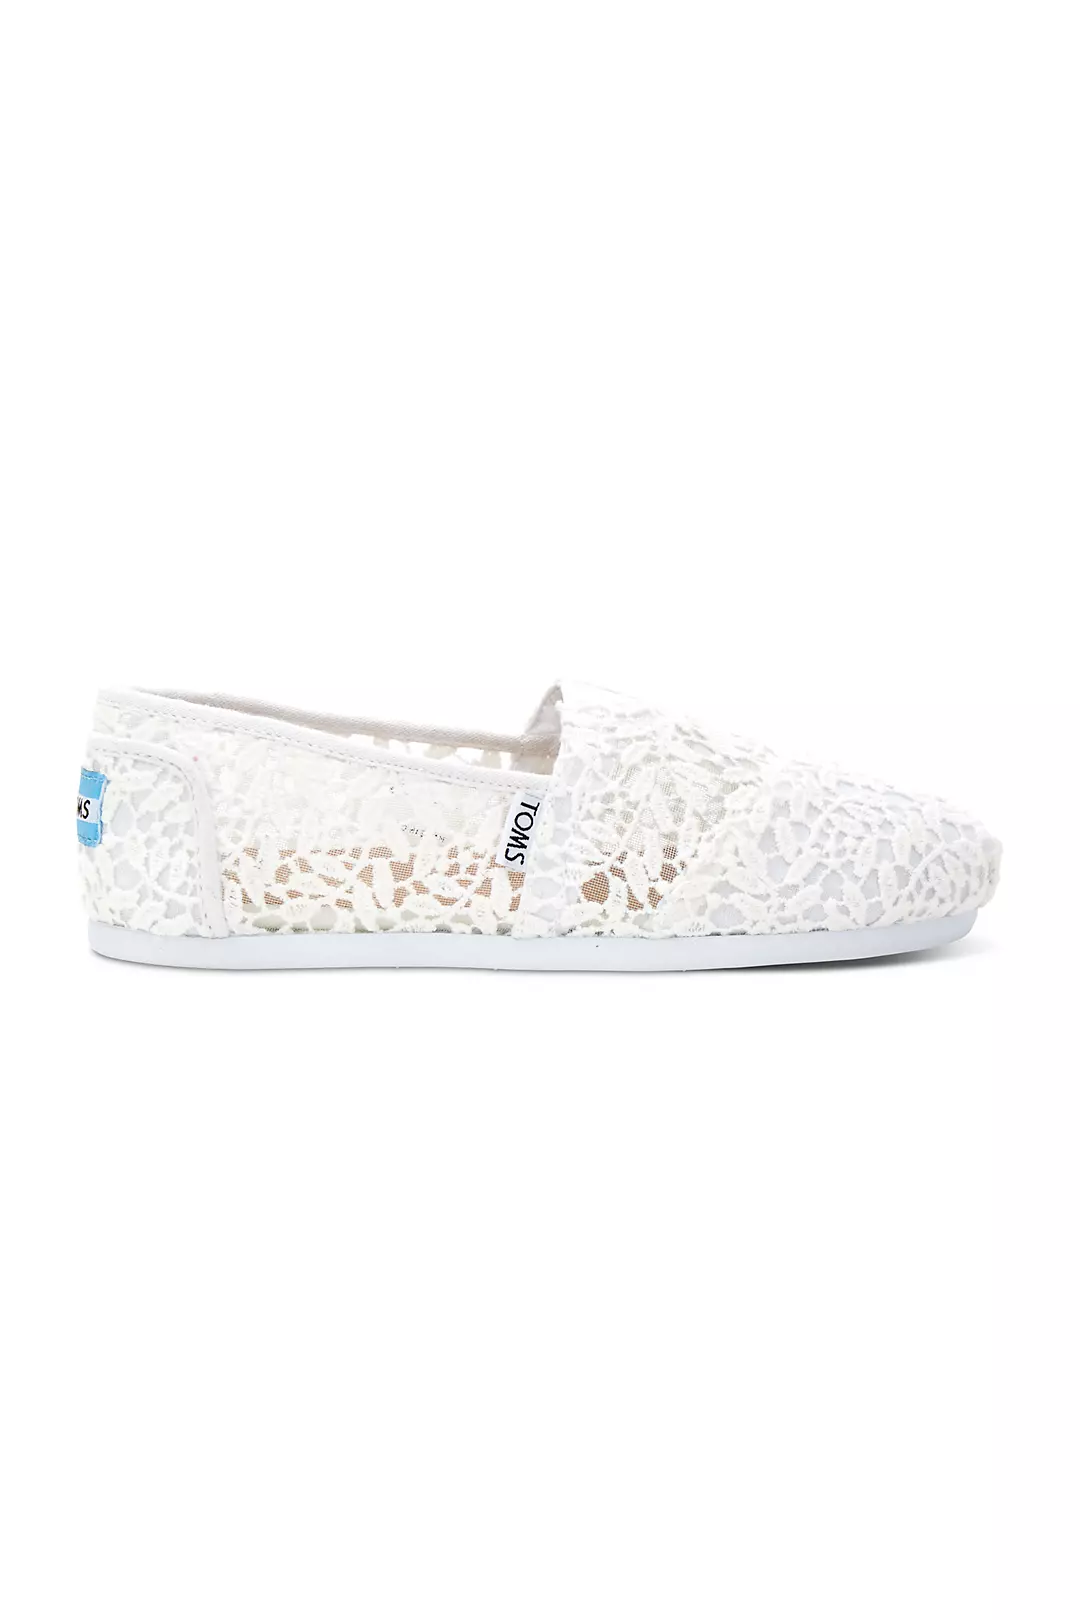 TOMS Lace Leaves Classic Slip-On Shoes Image